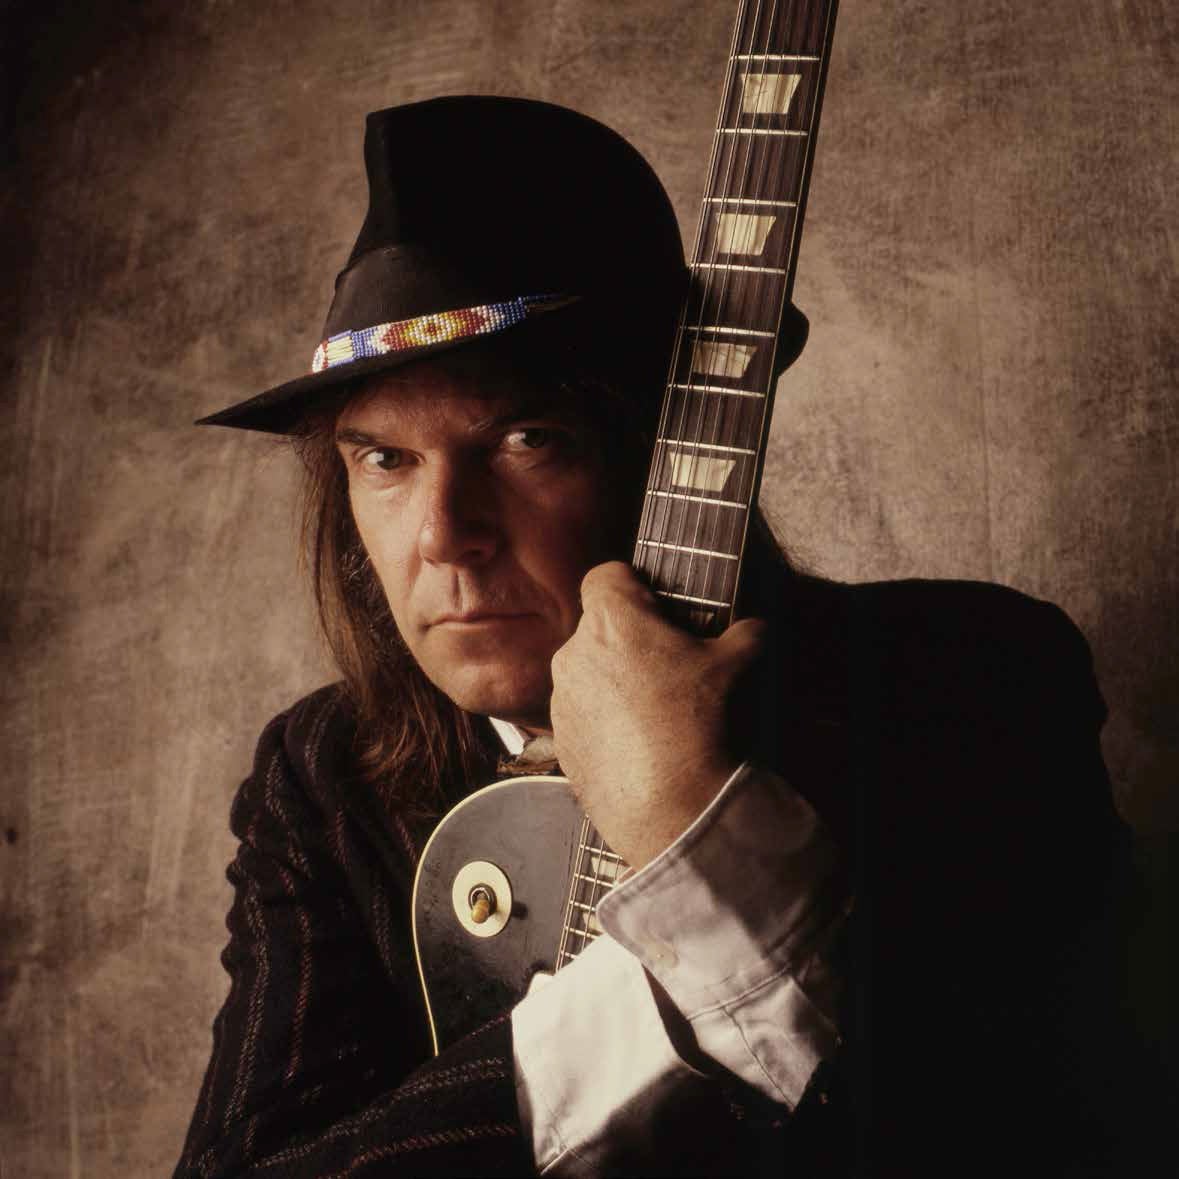 Neil Young, Musician/Songwriter